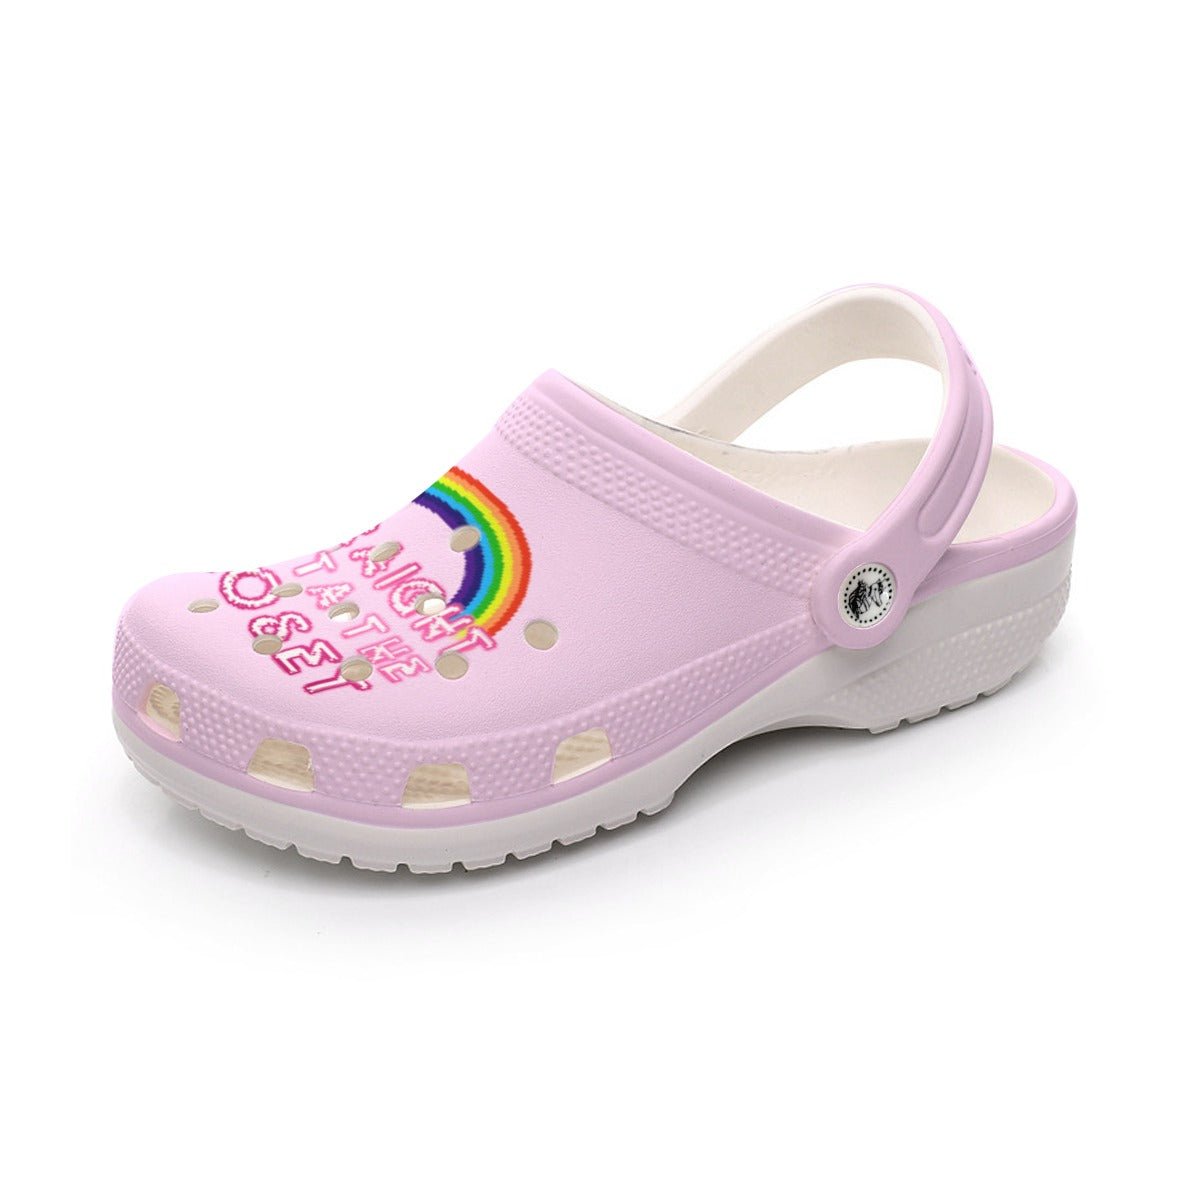 DQM - Straight Outta the Closet Unisex Clog Sandals - dragqueenmerch